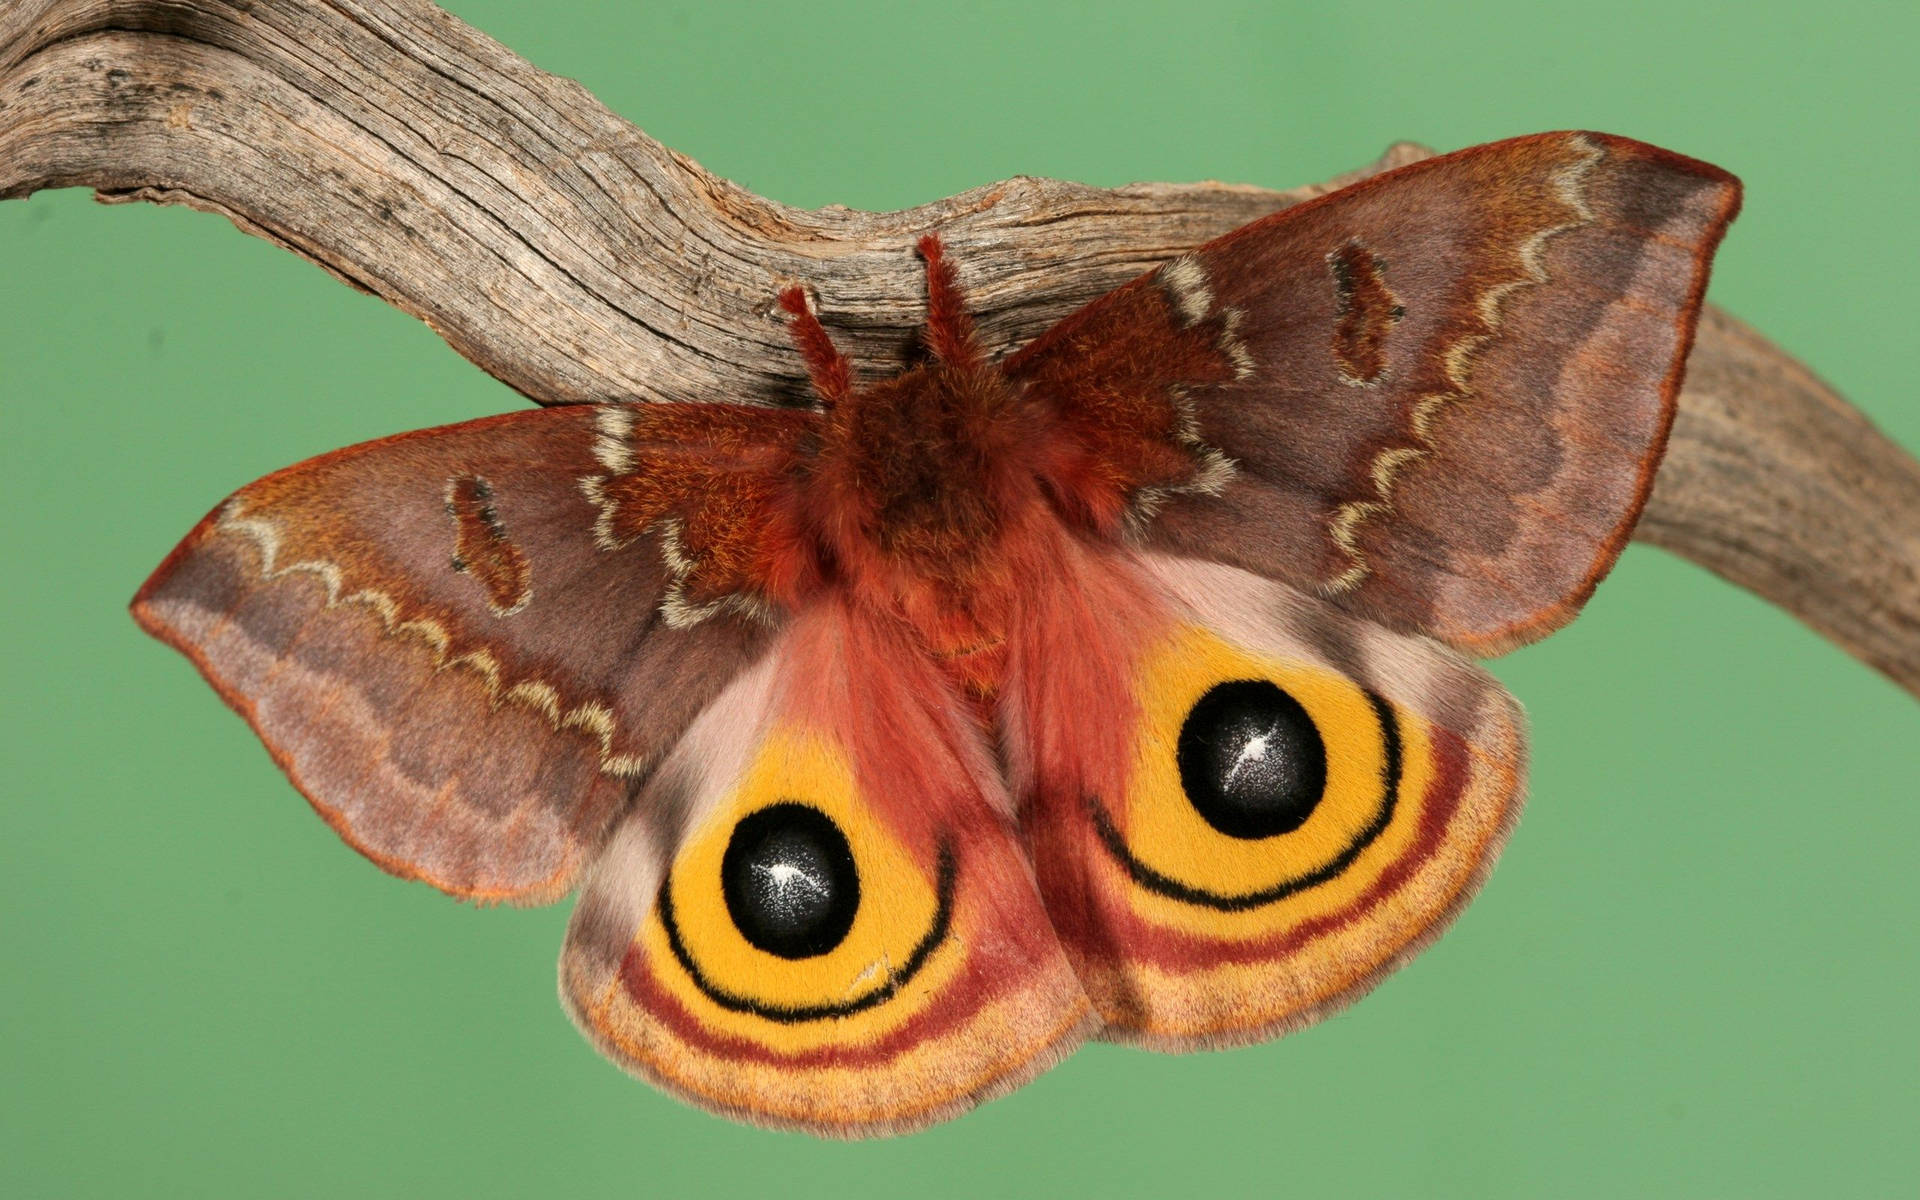 Moth Brown Mimicry On Branch Wallpaper